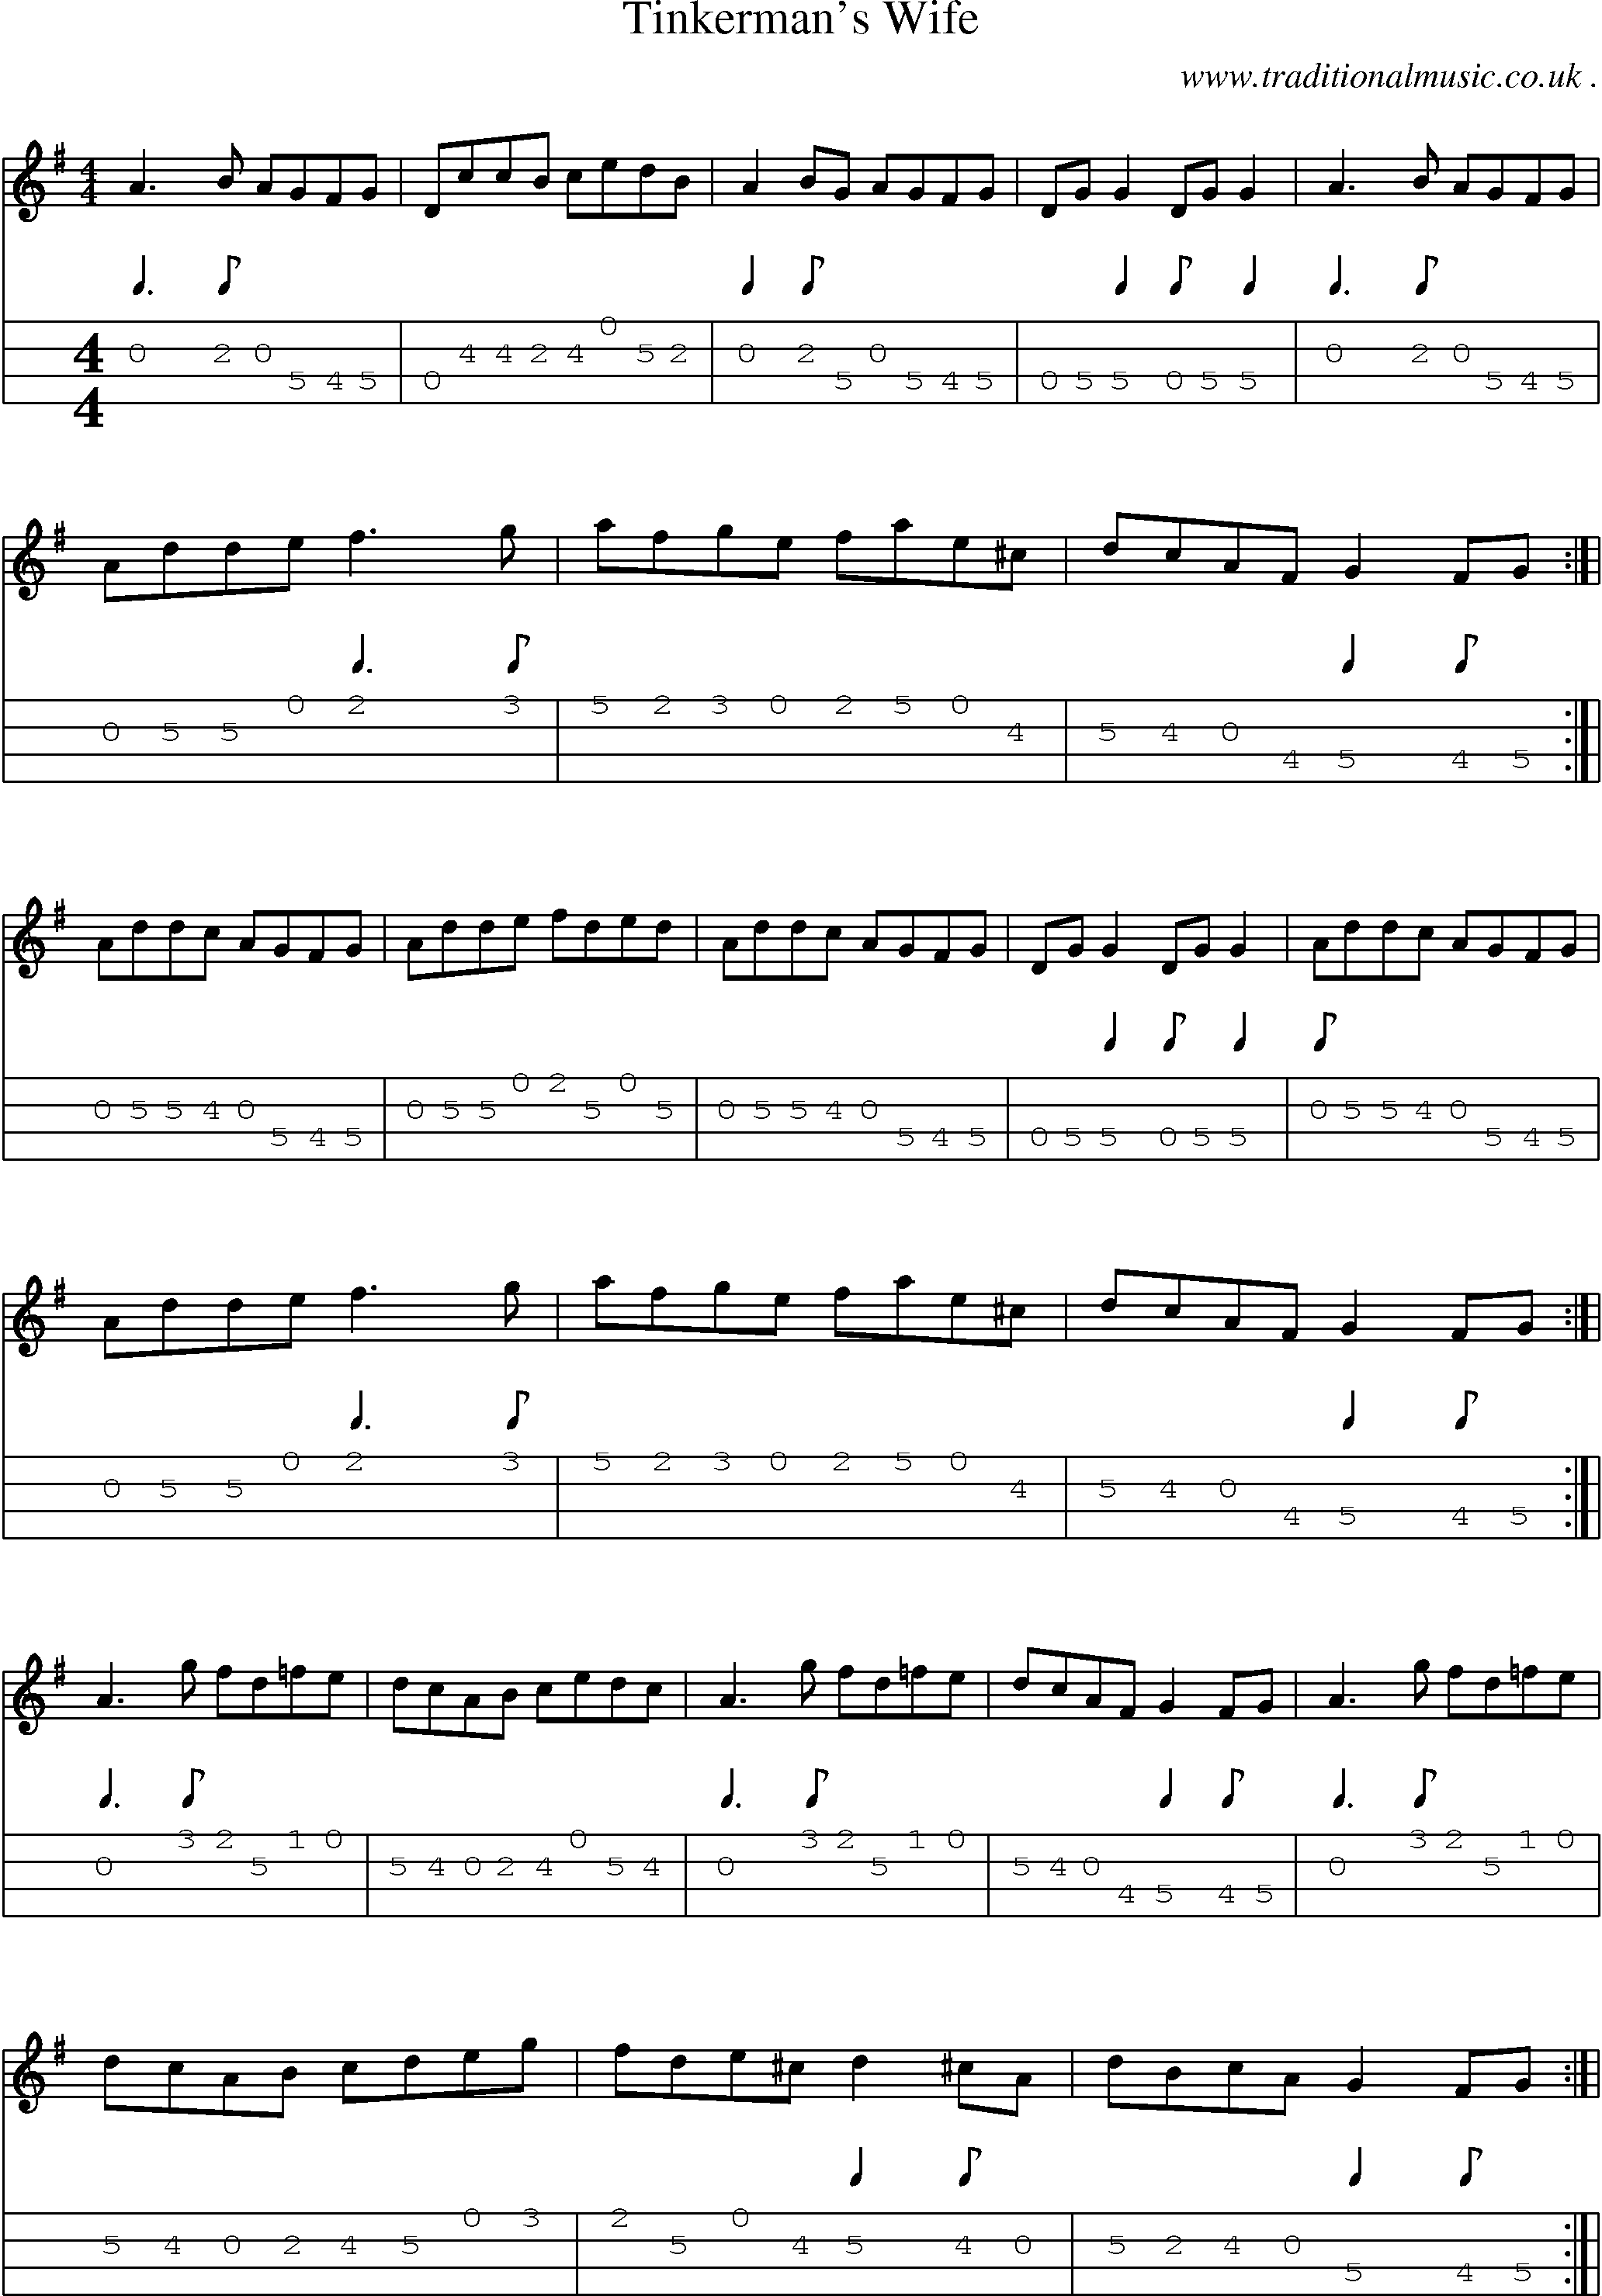 Sheet-Music and Mandolin Tabs for Tinkermans Wife